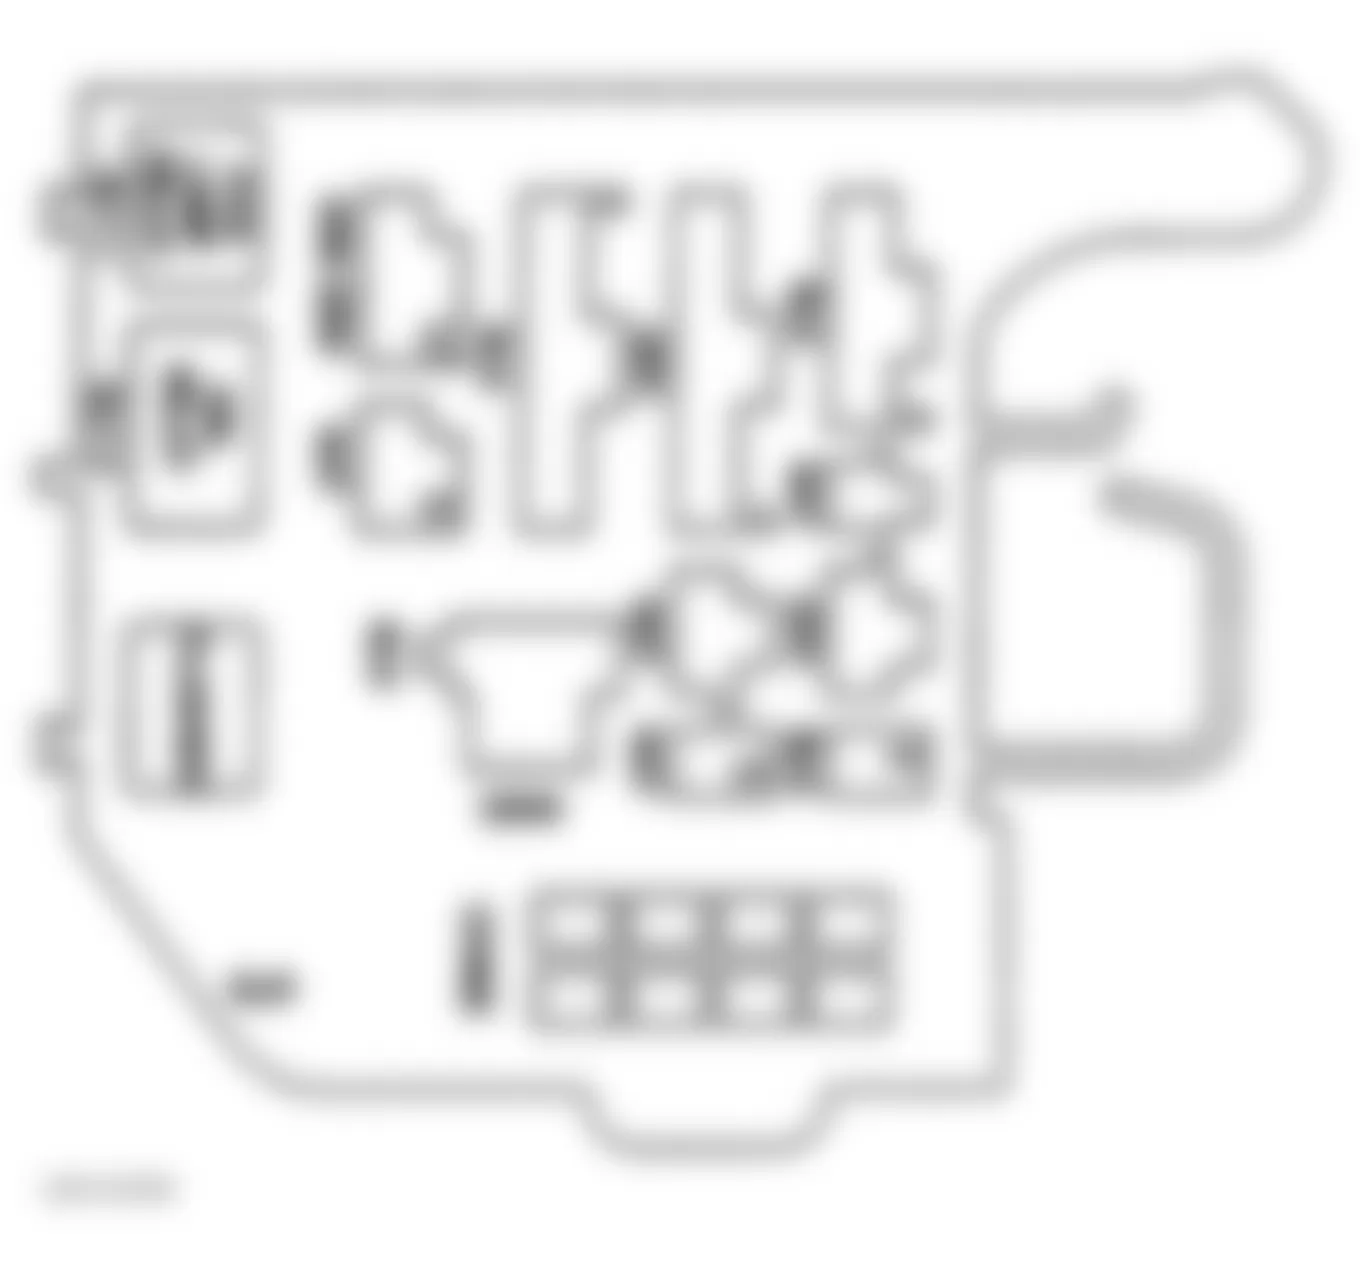 GMC Pickup C2500 1997 - Component Locations -  Identifying Convenience Center Components